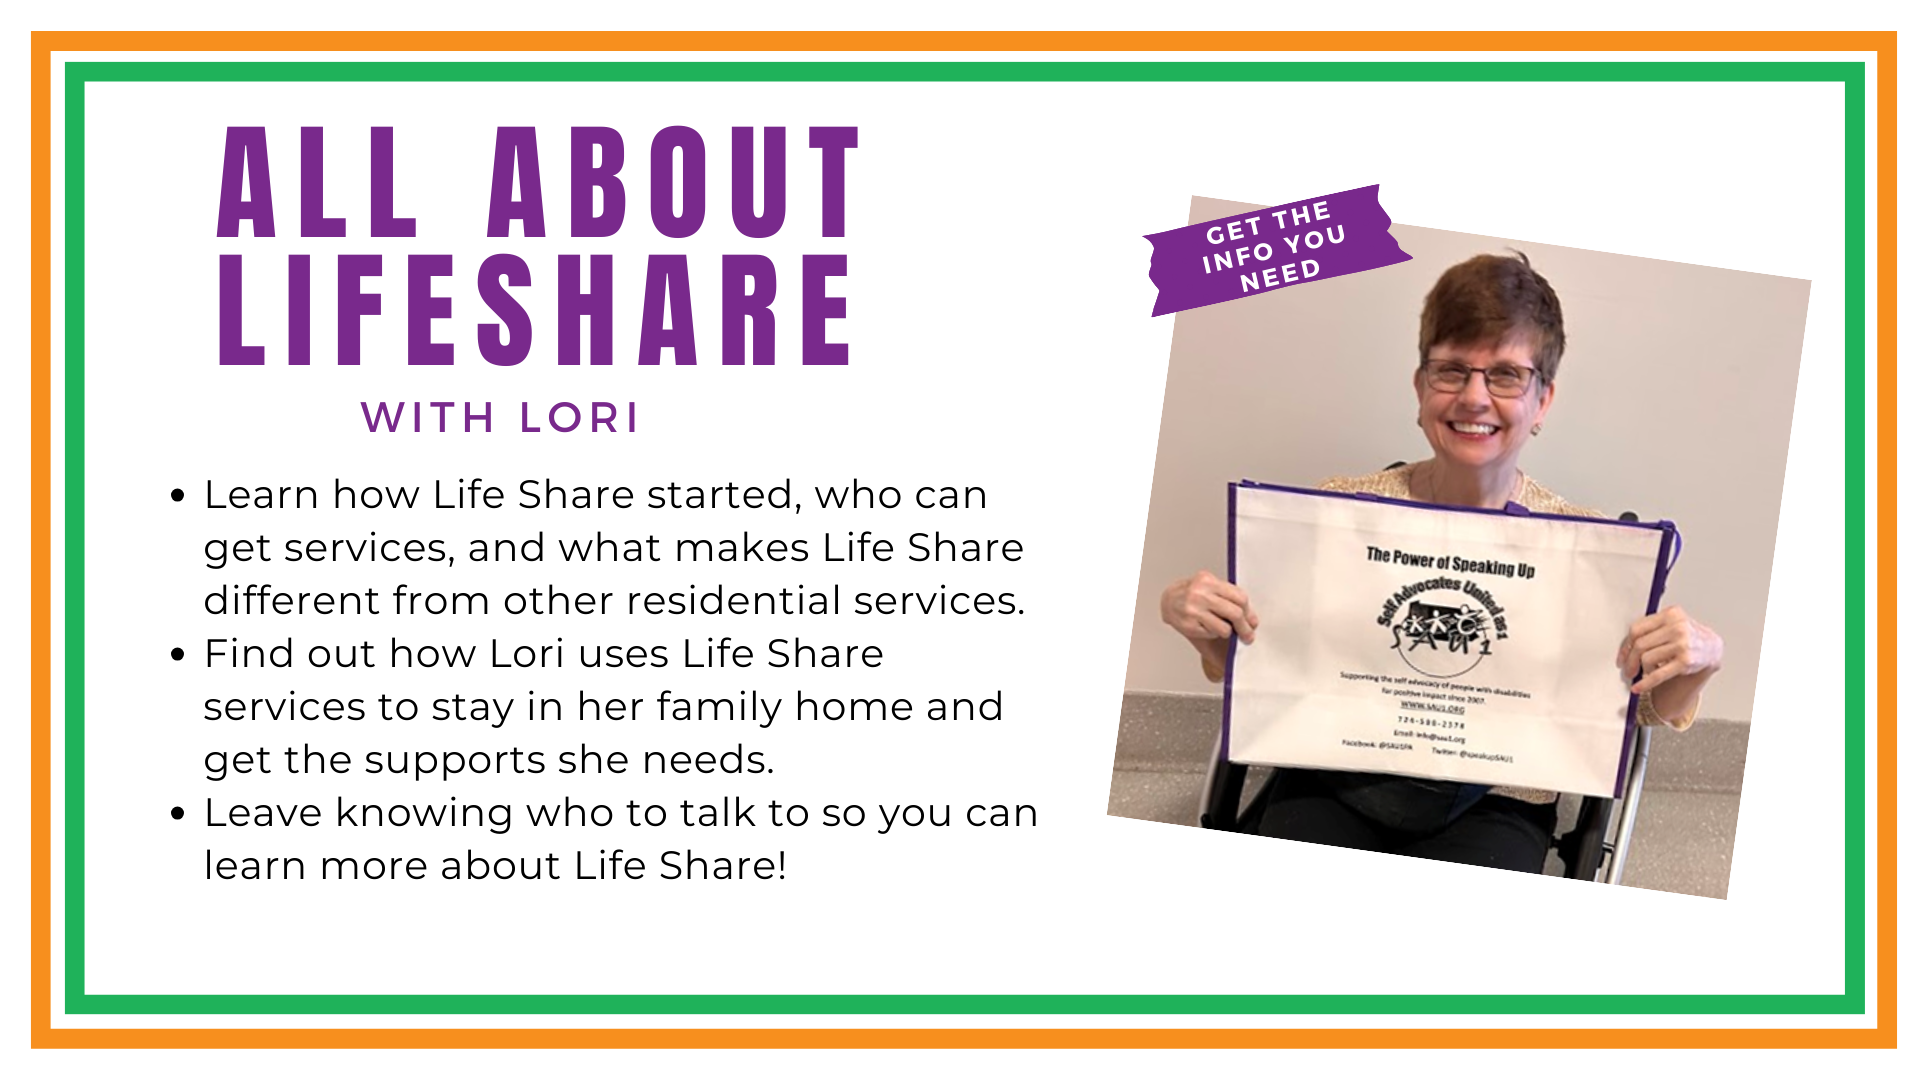 Banner. Lori Smiling, sitting in her wheelchair. Text in the upper right corner of the photo reads GET THE INFO YOU NEED . Text to the left of the photo ALL ABOUT LIFESHARE WITH LORI   Learn how Life Share started, who can get services, and what makes Life Share different from other residential services.  Find out how Lori uses Life Share services to stay in her family home and get the supports she needs.  Leave knowing who to talk to so you can learn more about Life Share!